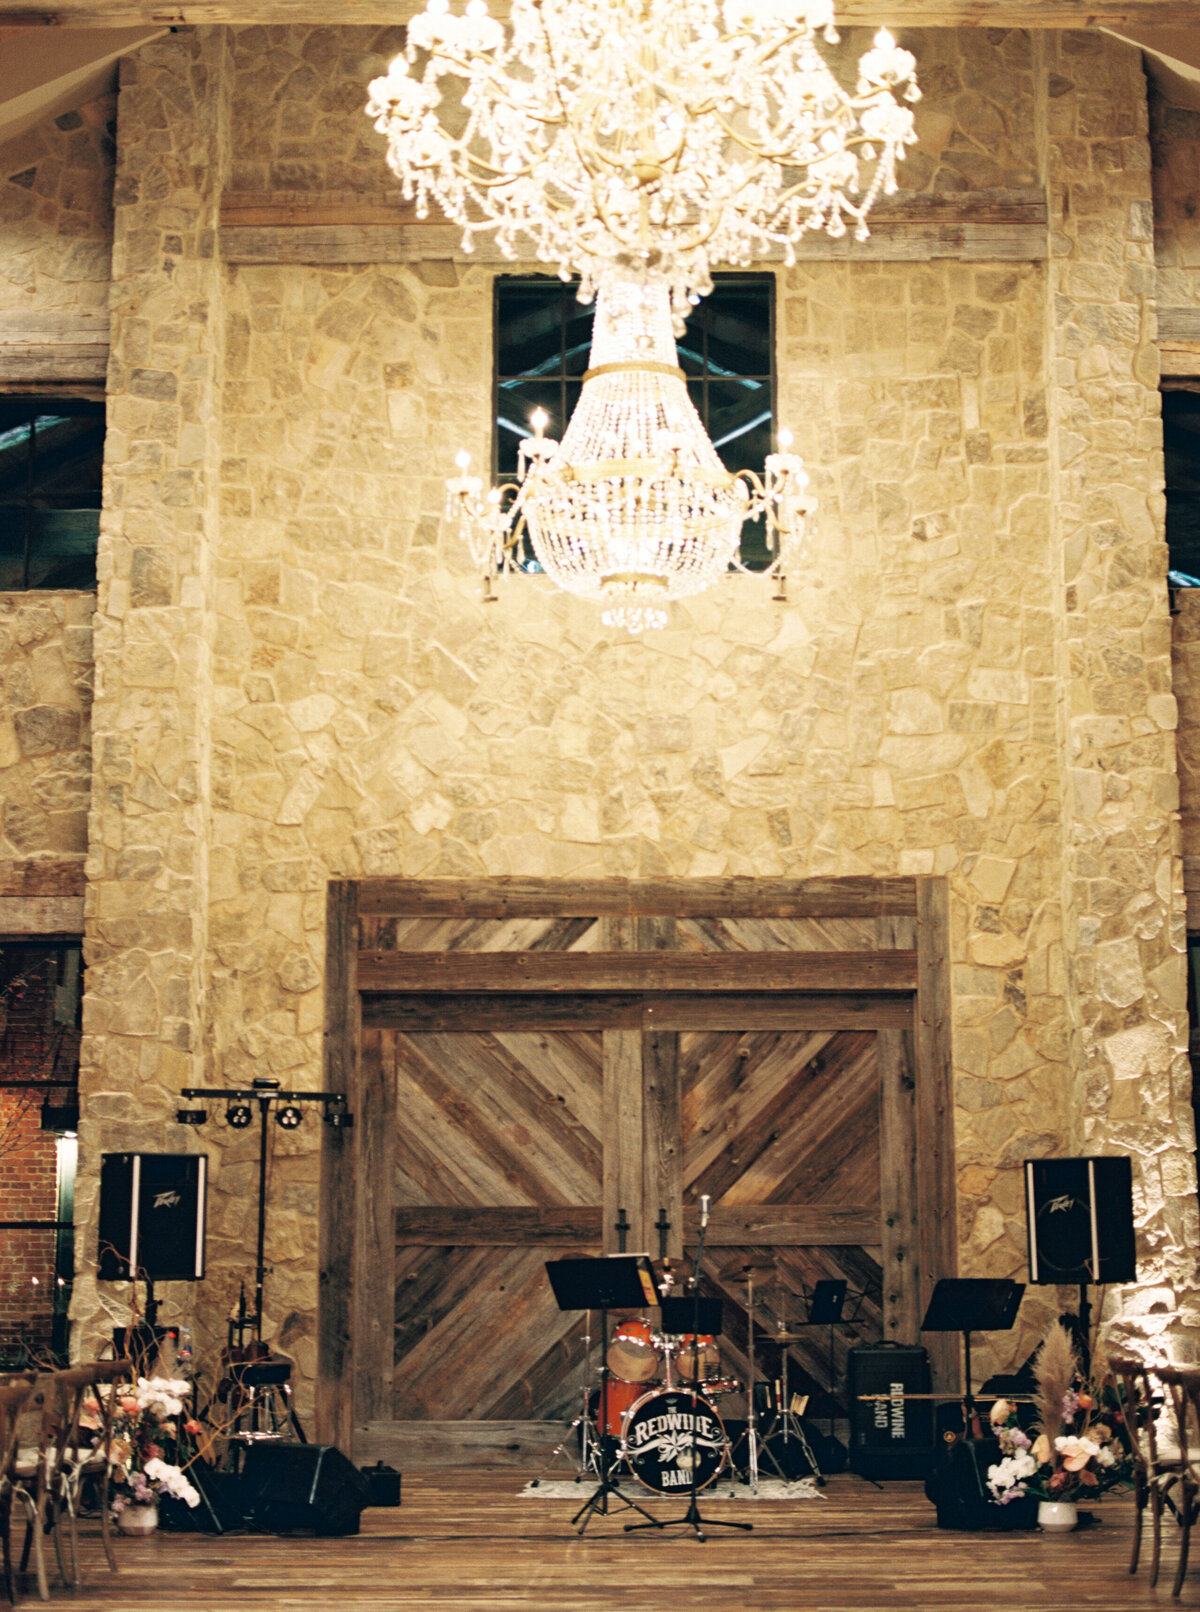 Hotel Drover - Fort Worth Texas - Lauren and Jeff Murray - Stephanie Michelle Photography @stephaniemichellephotog-11-4